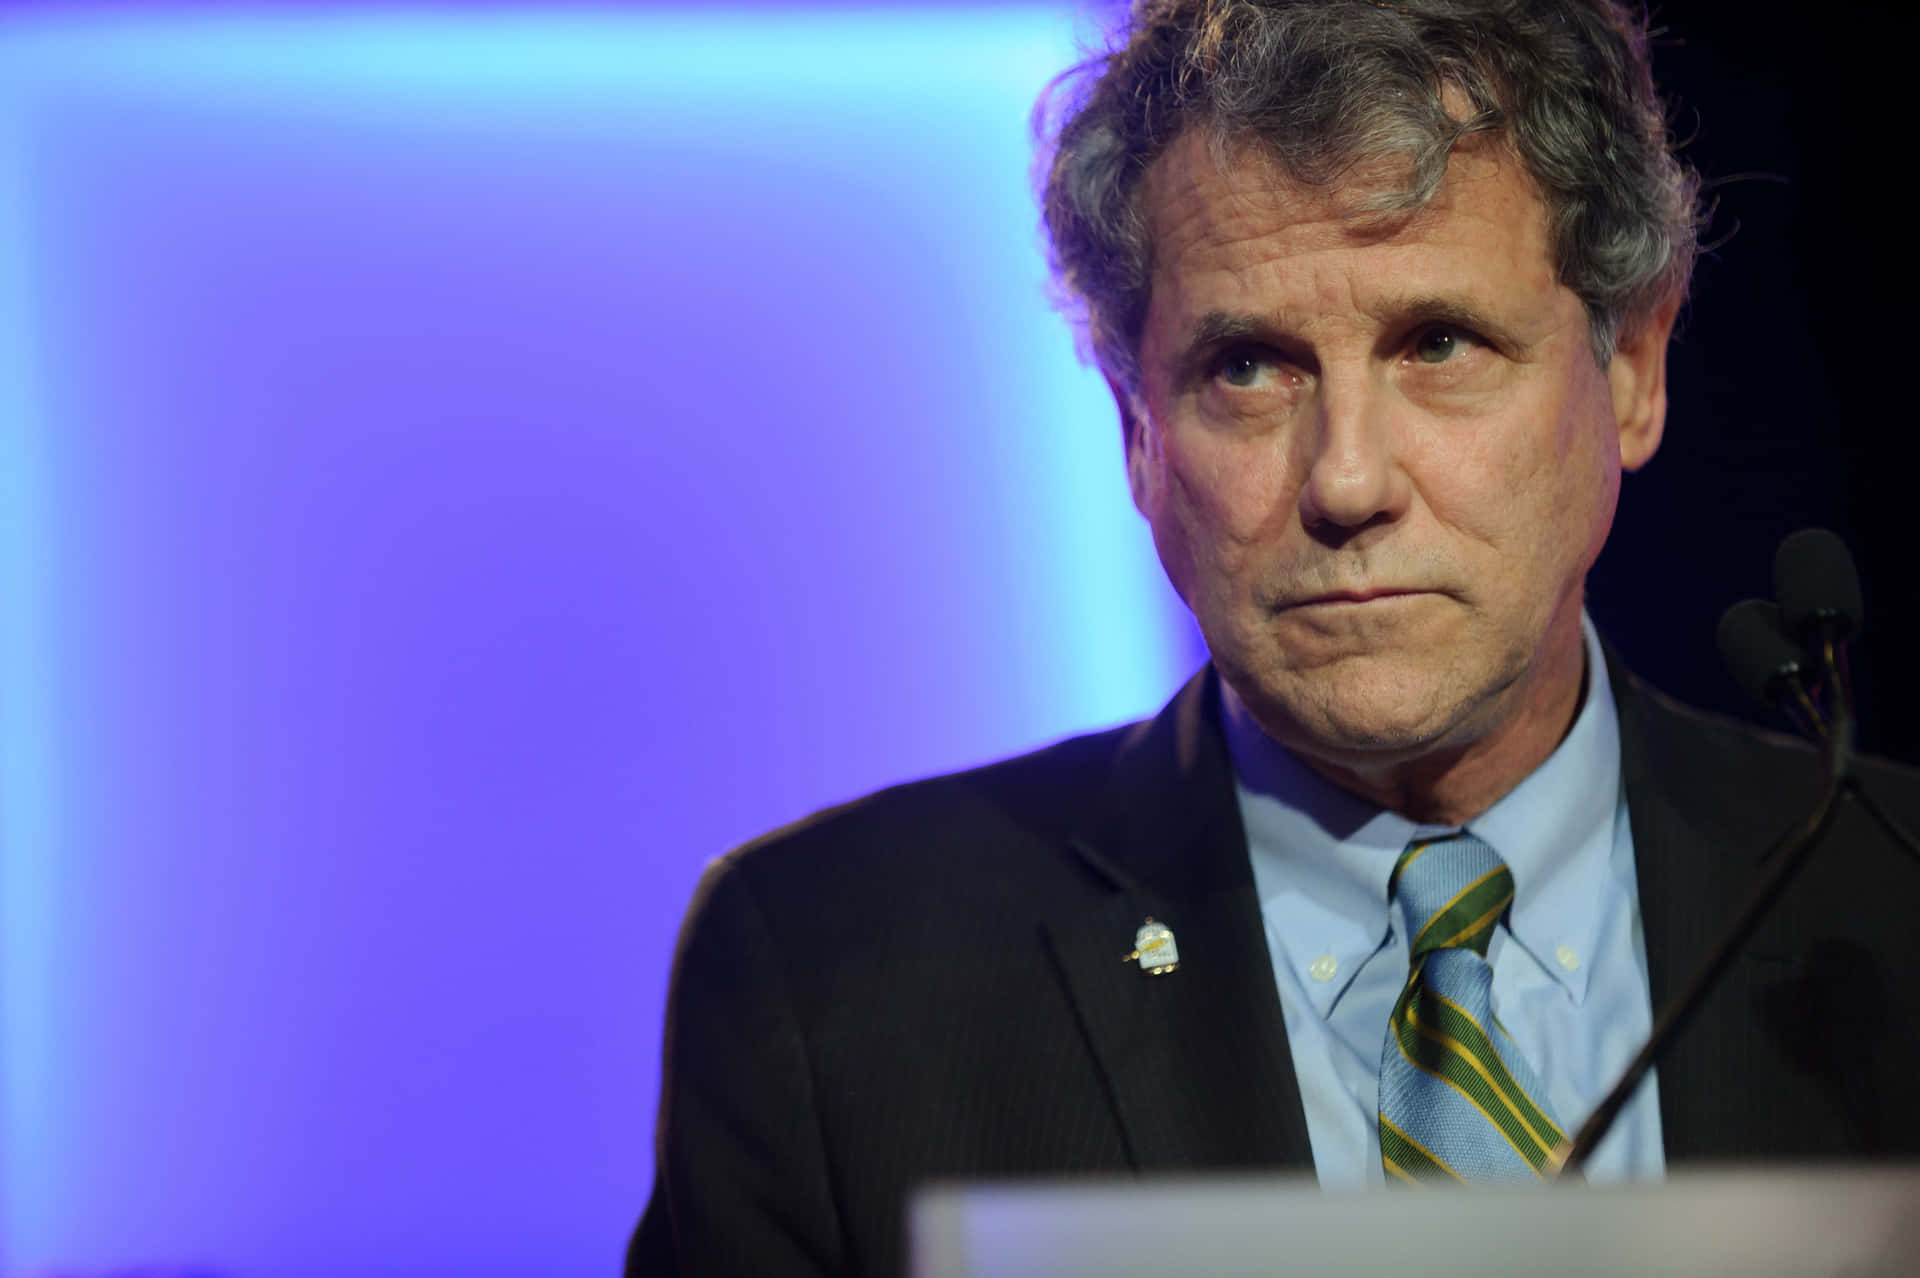 Caption: Sherrod Brown With A Frowning Facial Expression Wallpaper